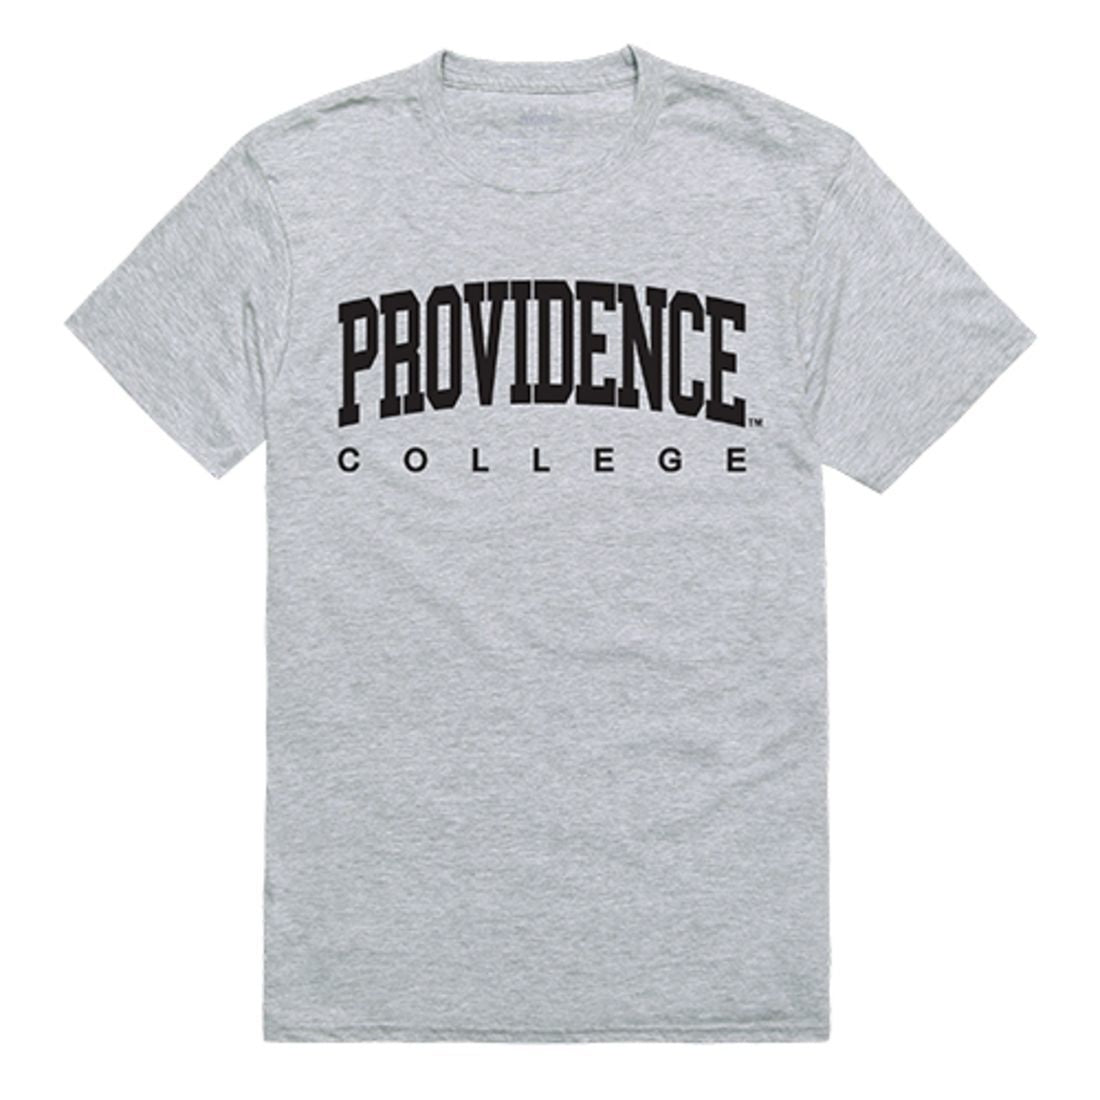 Providence College Game Day T-Shirt Heather Grey-Campus-Wardrobe